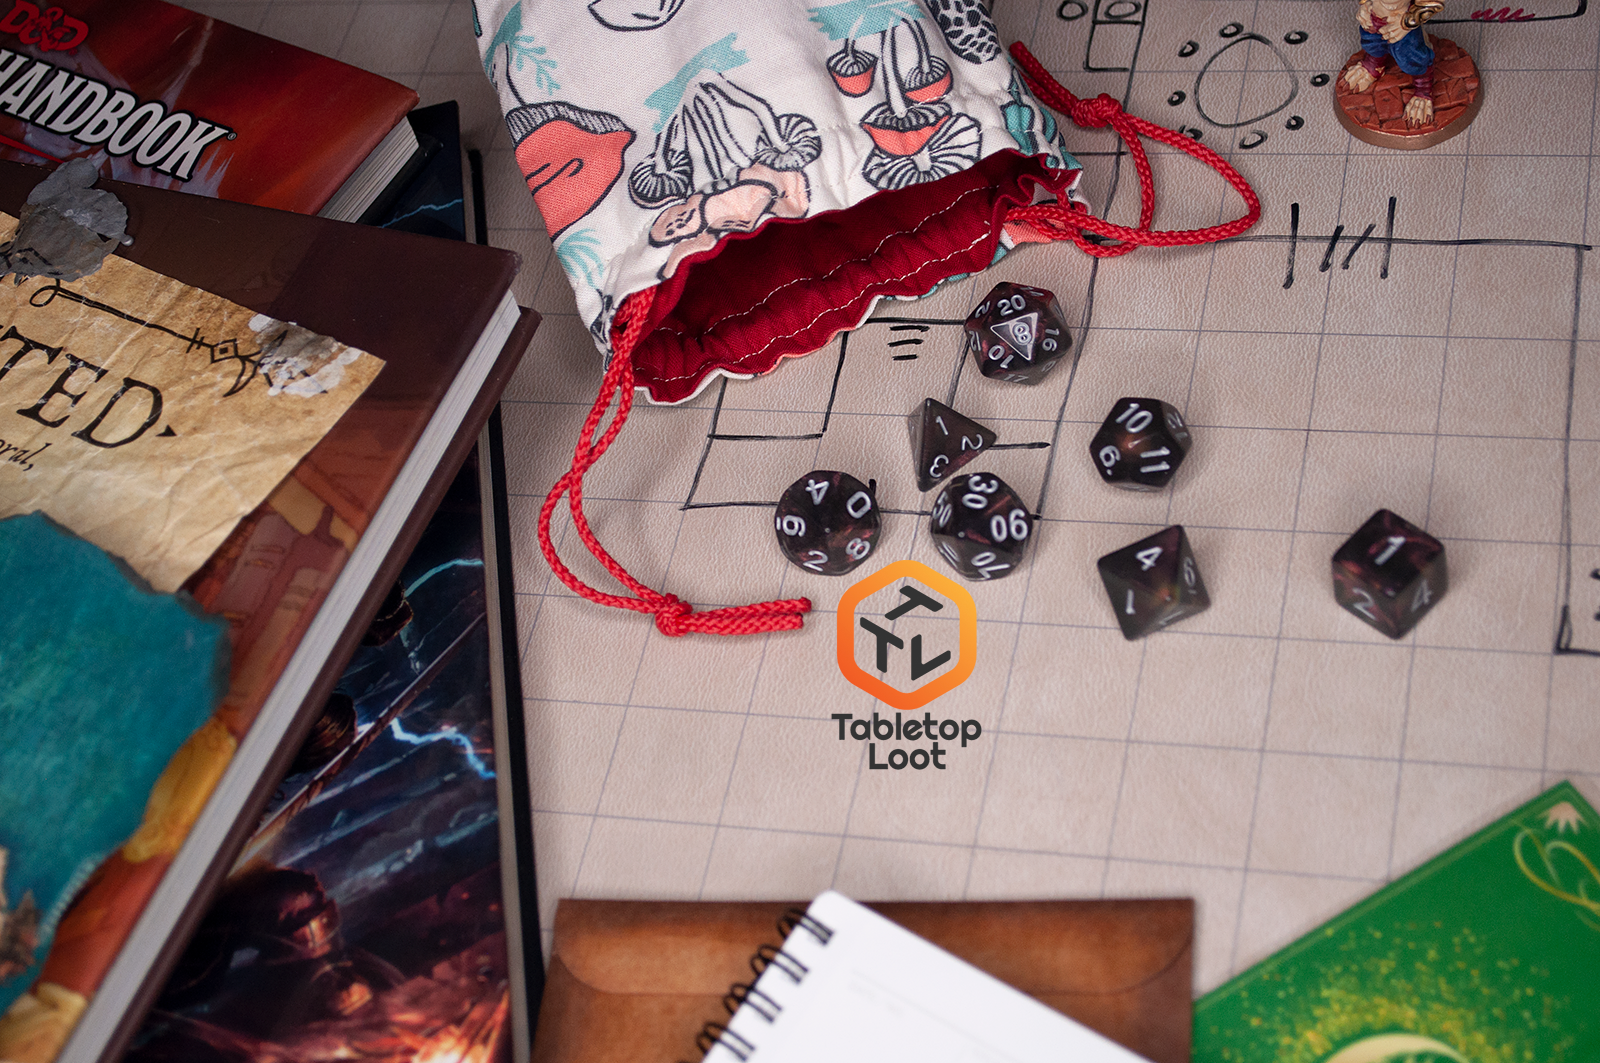 The Dark Star 7 piece dice set from Tabletop Loot with glittering swirls of pink, green, gold, and blue, inked in silver, spills across a gaming table.